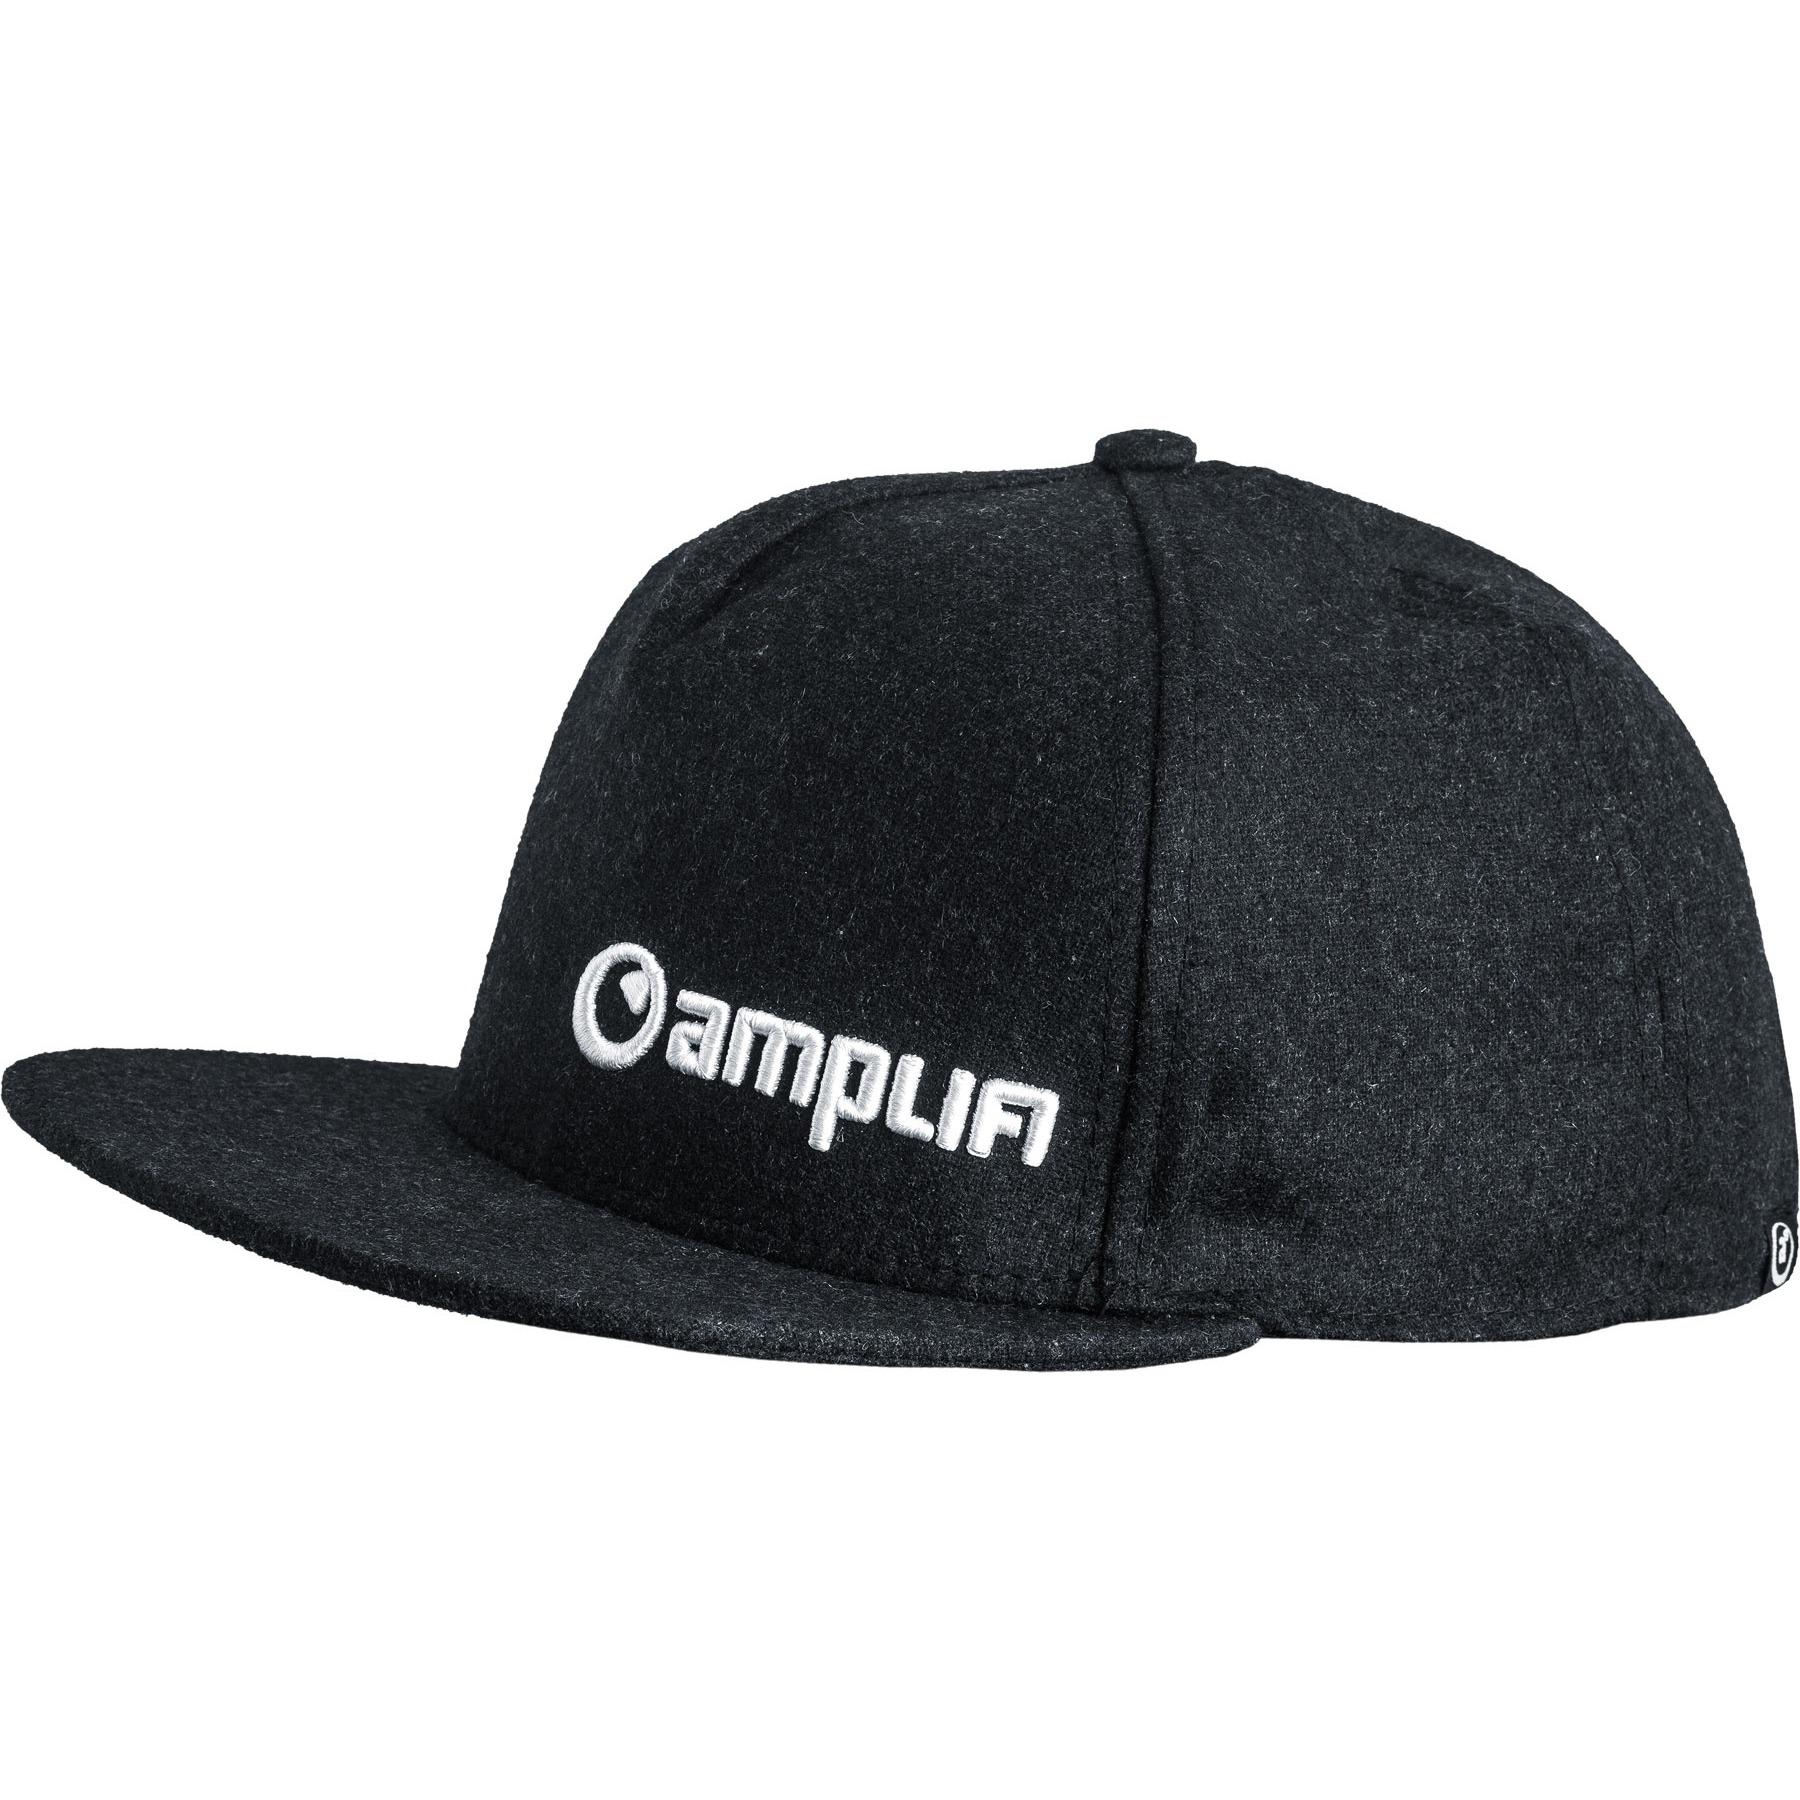 Picture of Amplifi Team Hat Snapback Cap - charcoal